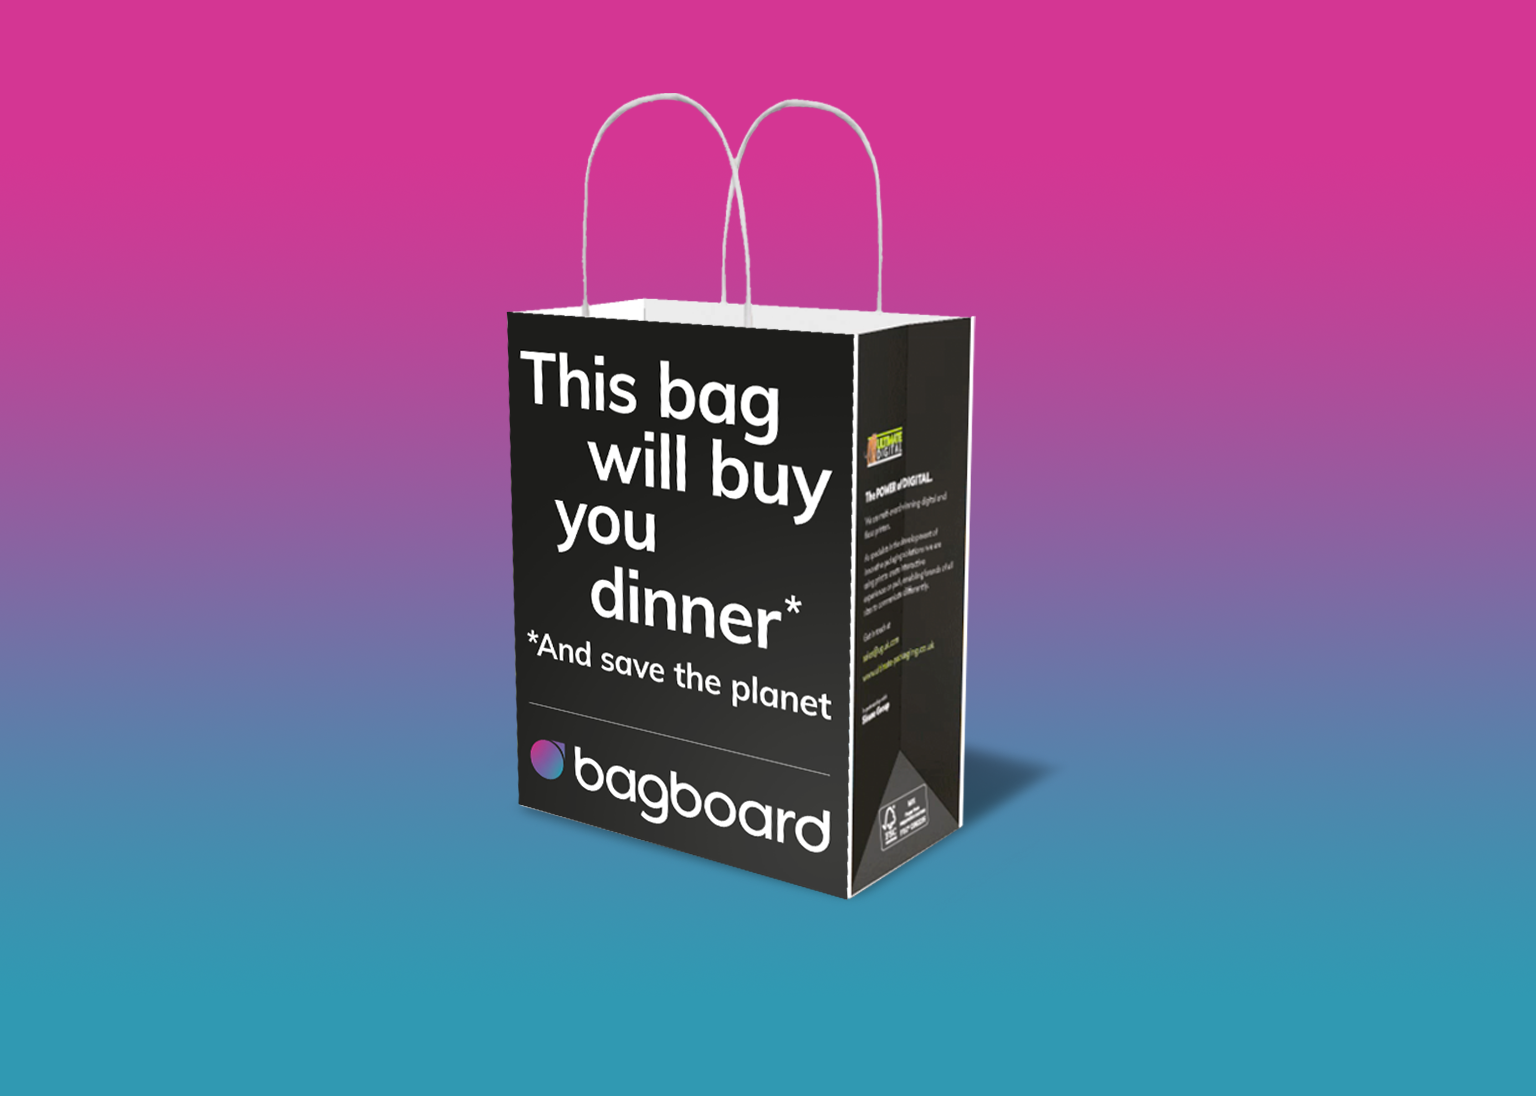 3D visual of Bagboard bag featuring their own branding and slogan